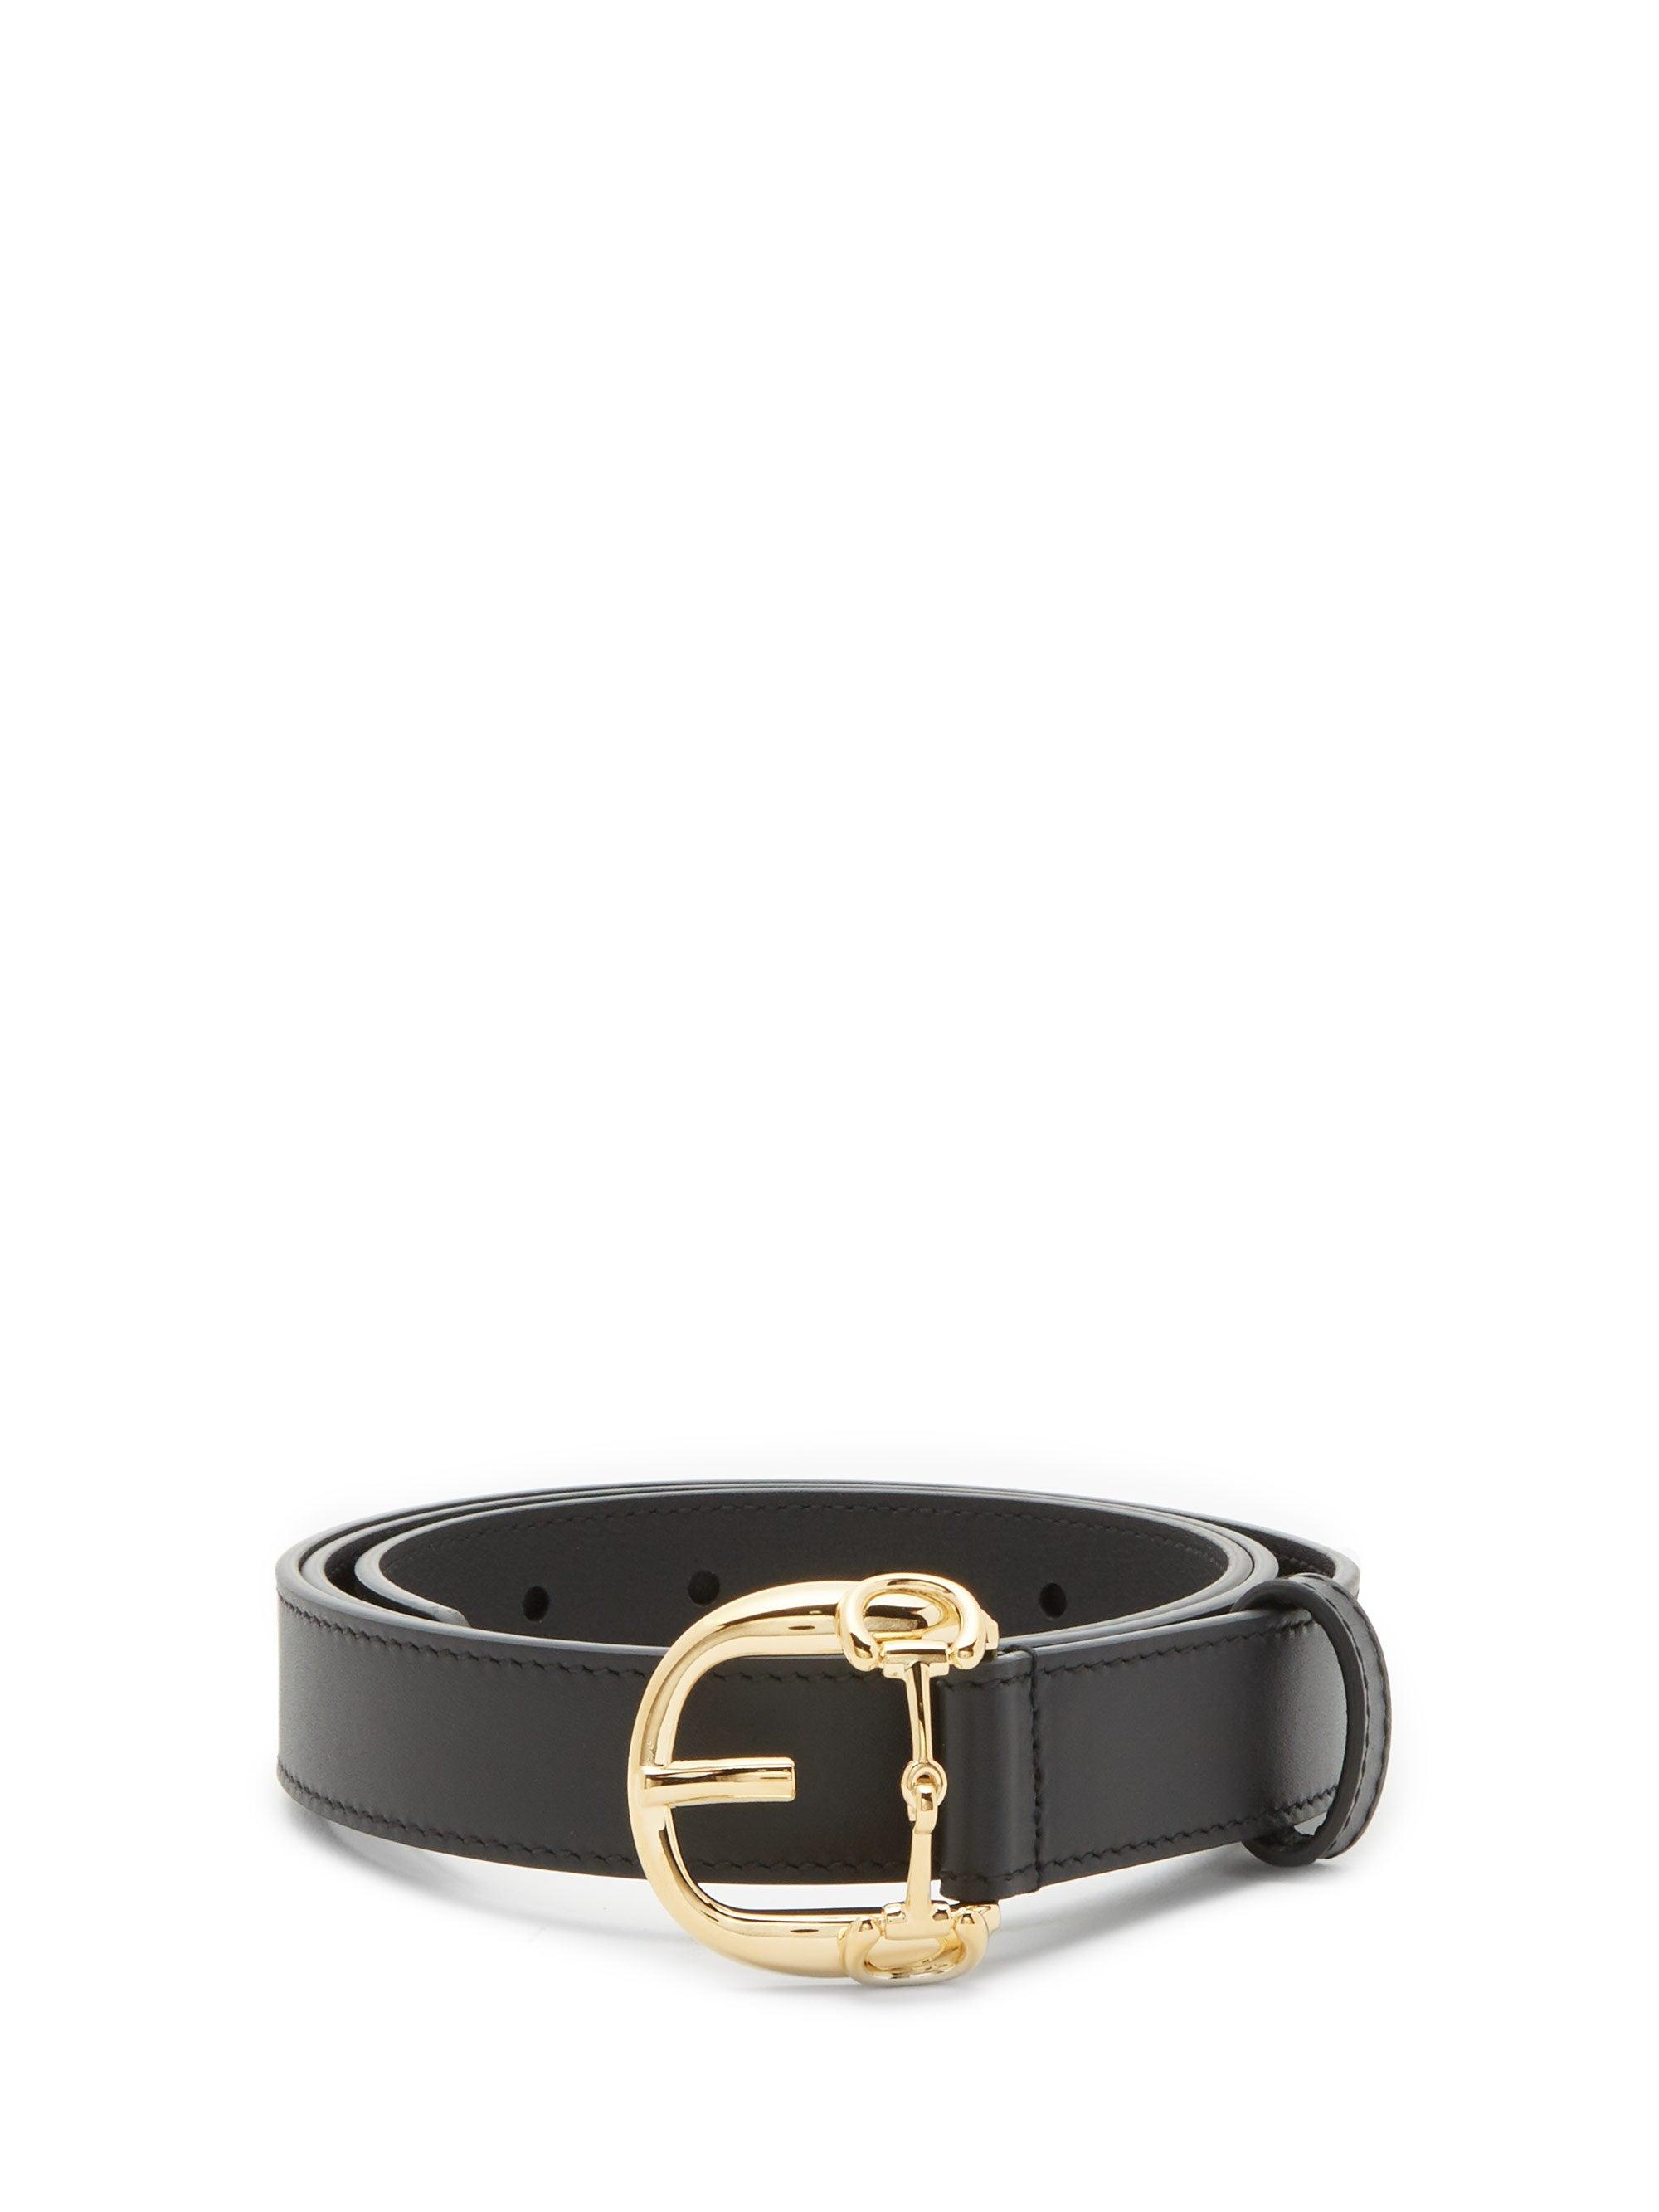 Gucci Leather Thin Belt With Horsebit Buckle in Black for Men - Lyst